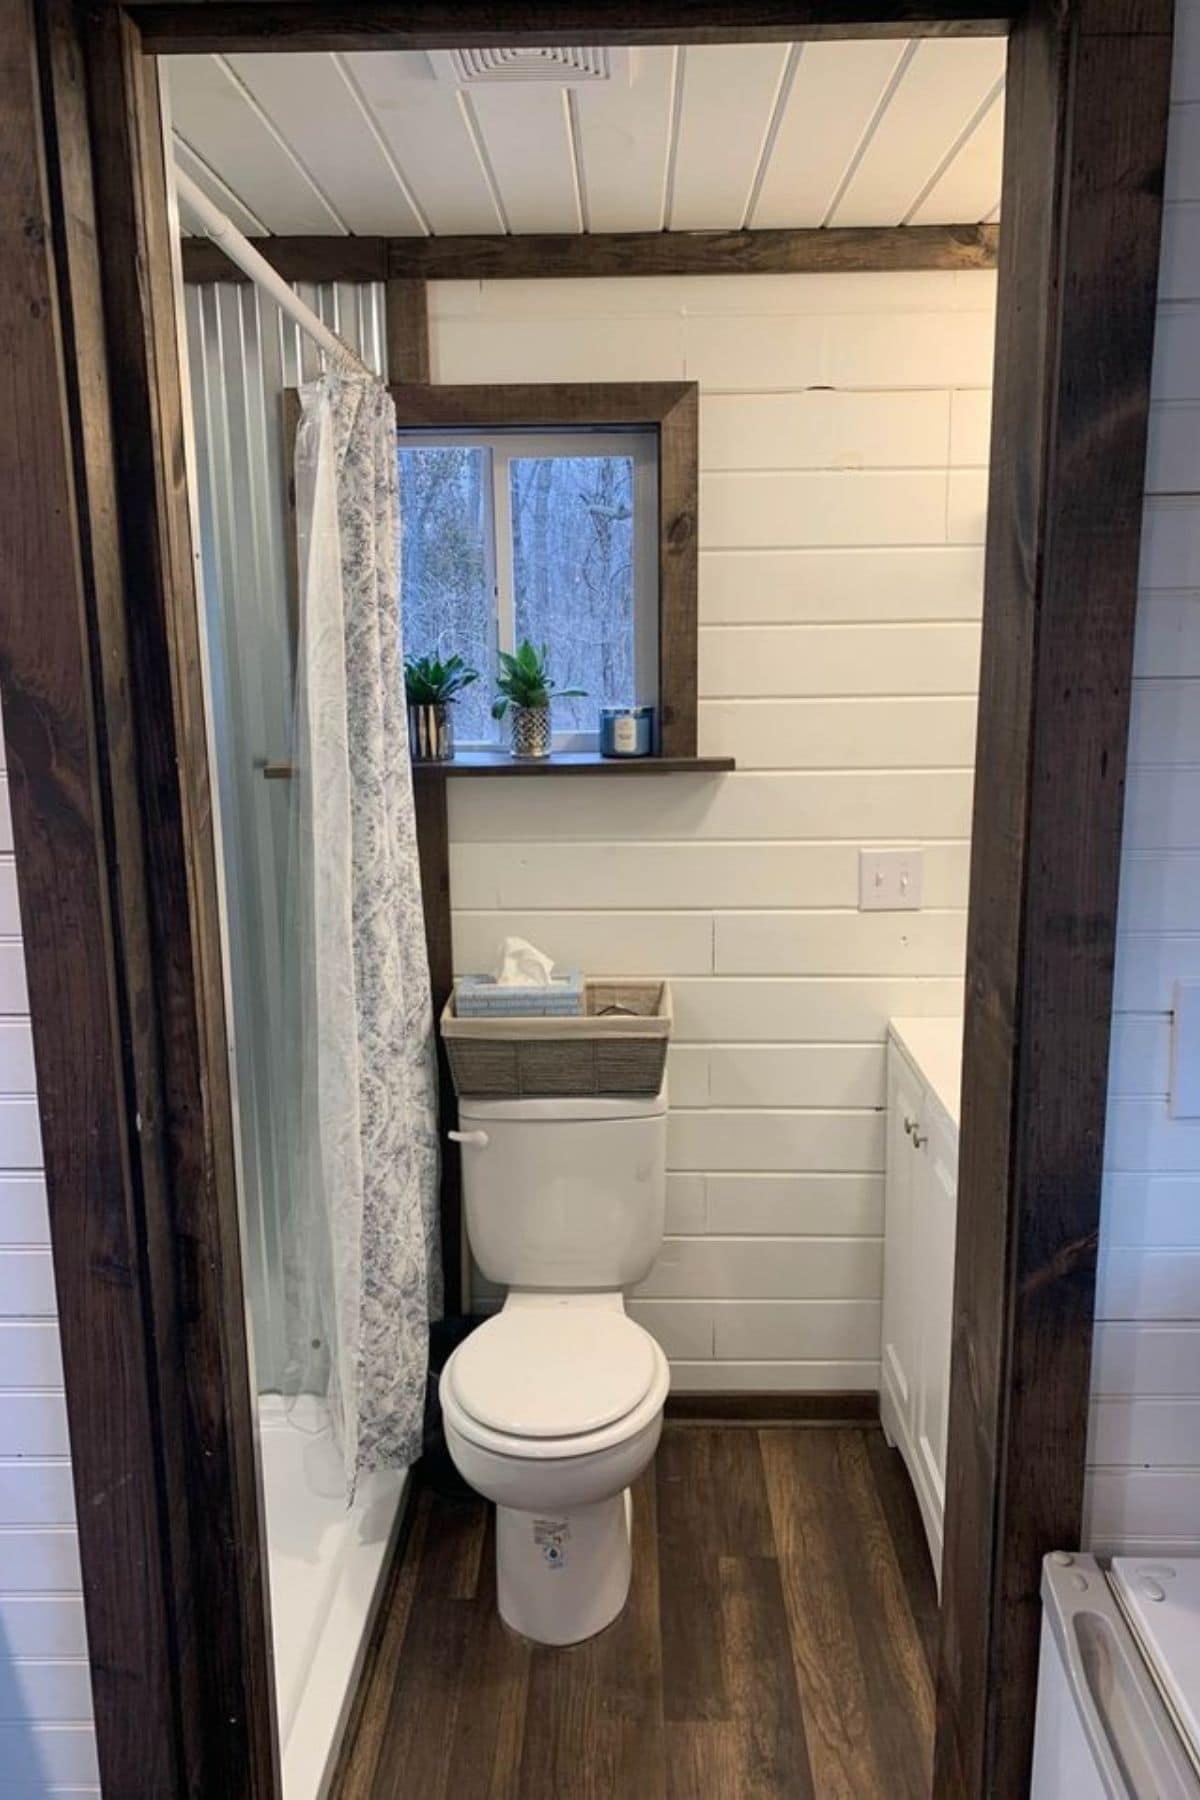 Flush toilet against shiplap wall directly across from door